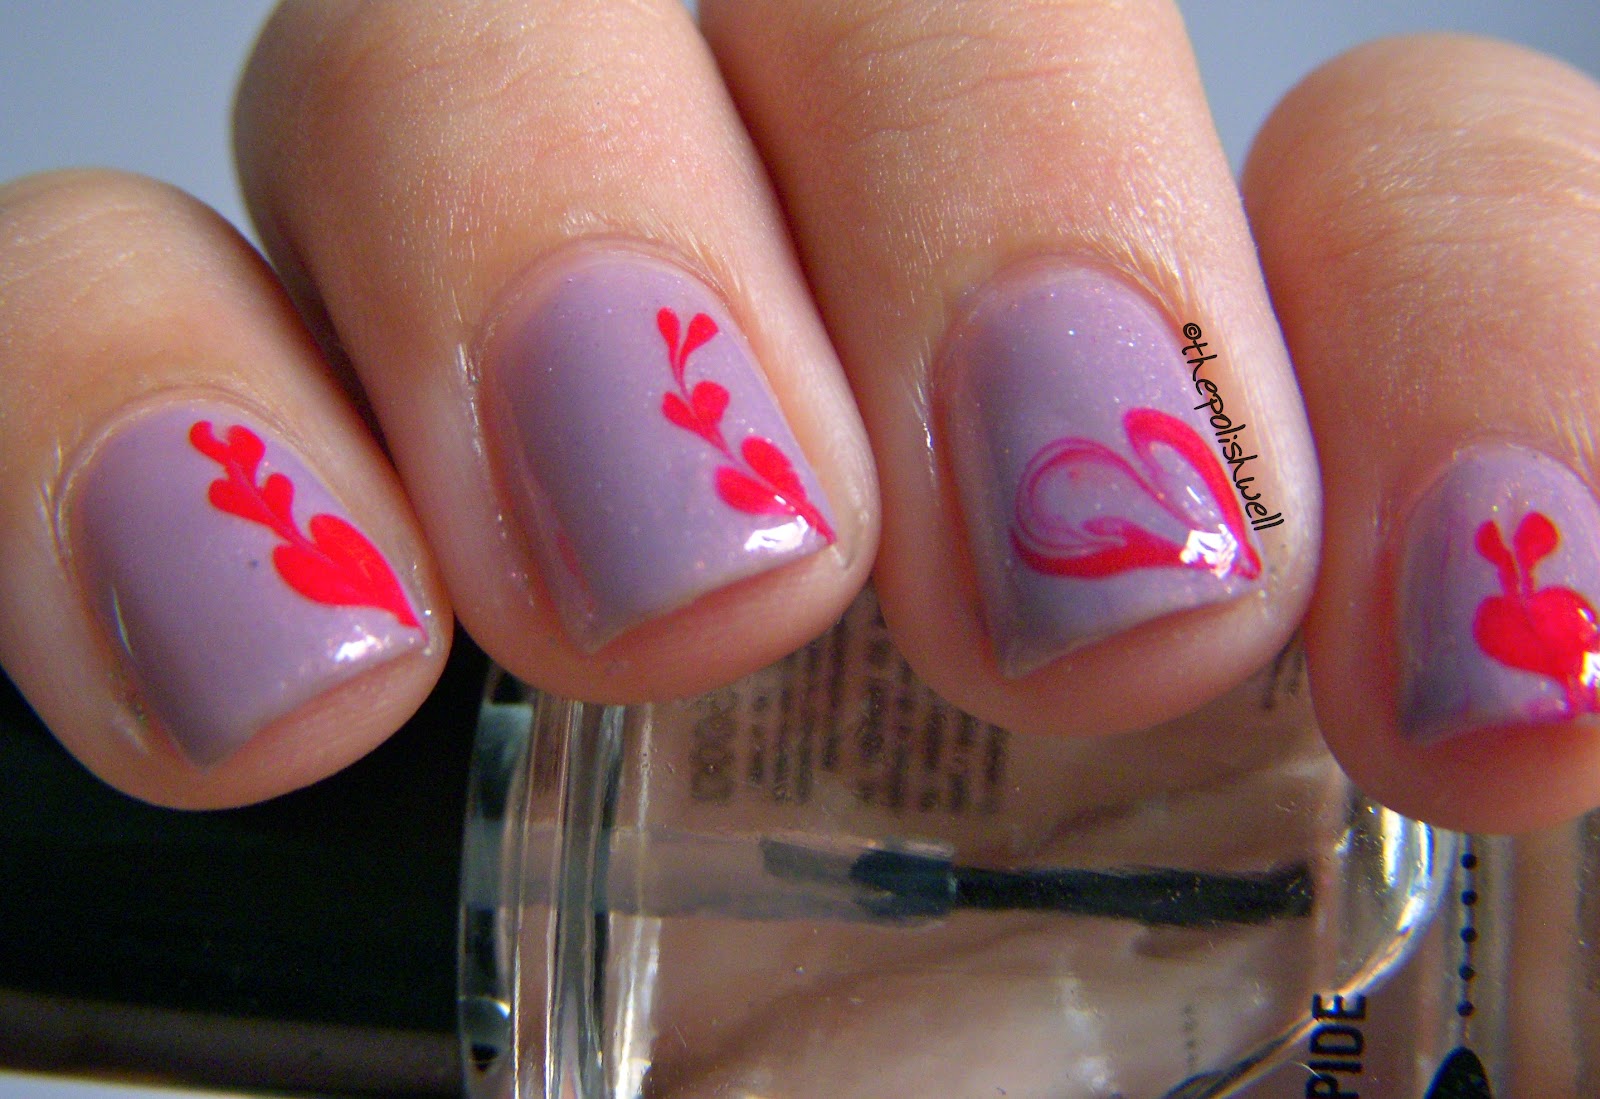 4. "Heart Nail Designs for Valentine's Day" - wide 2